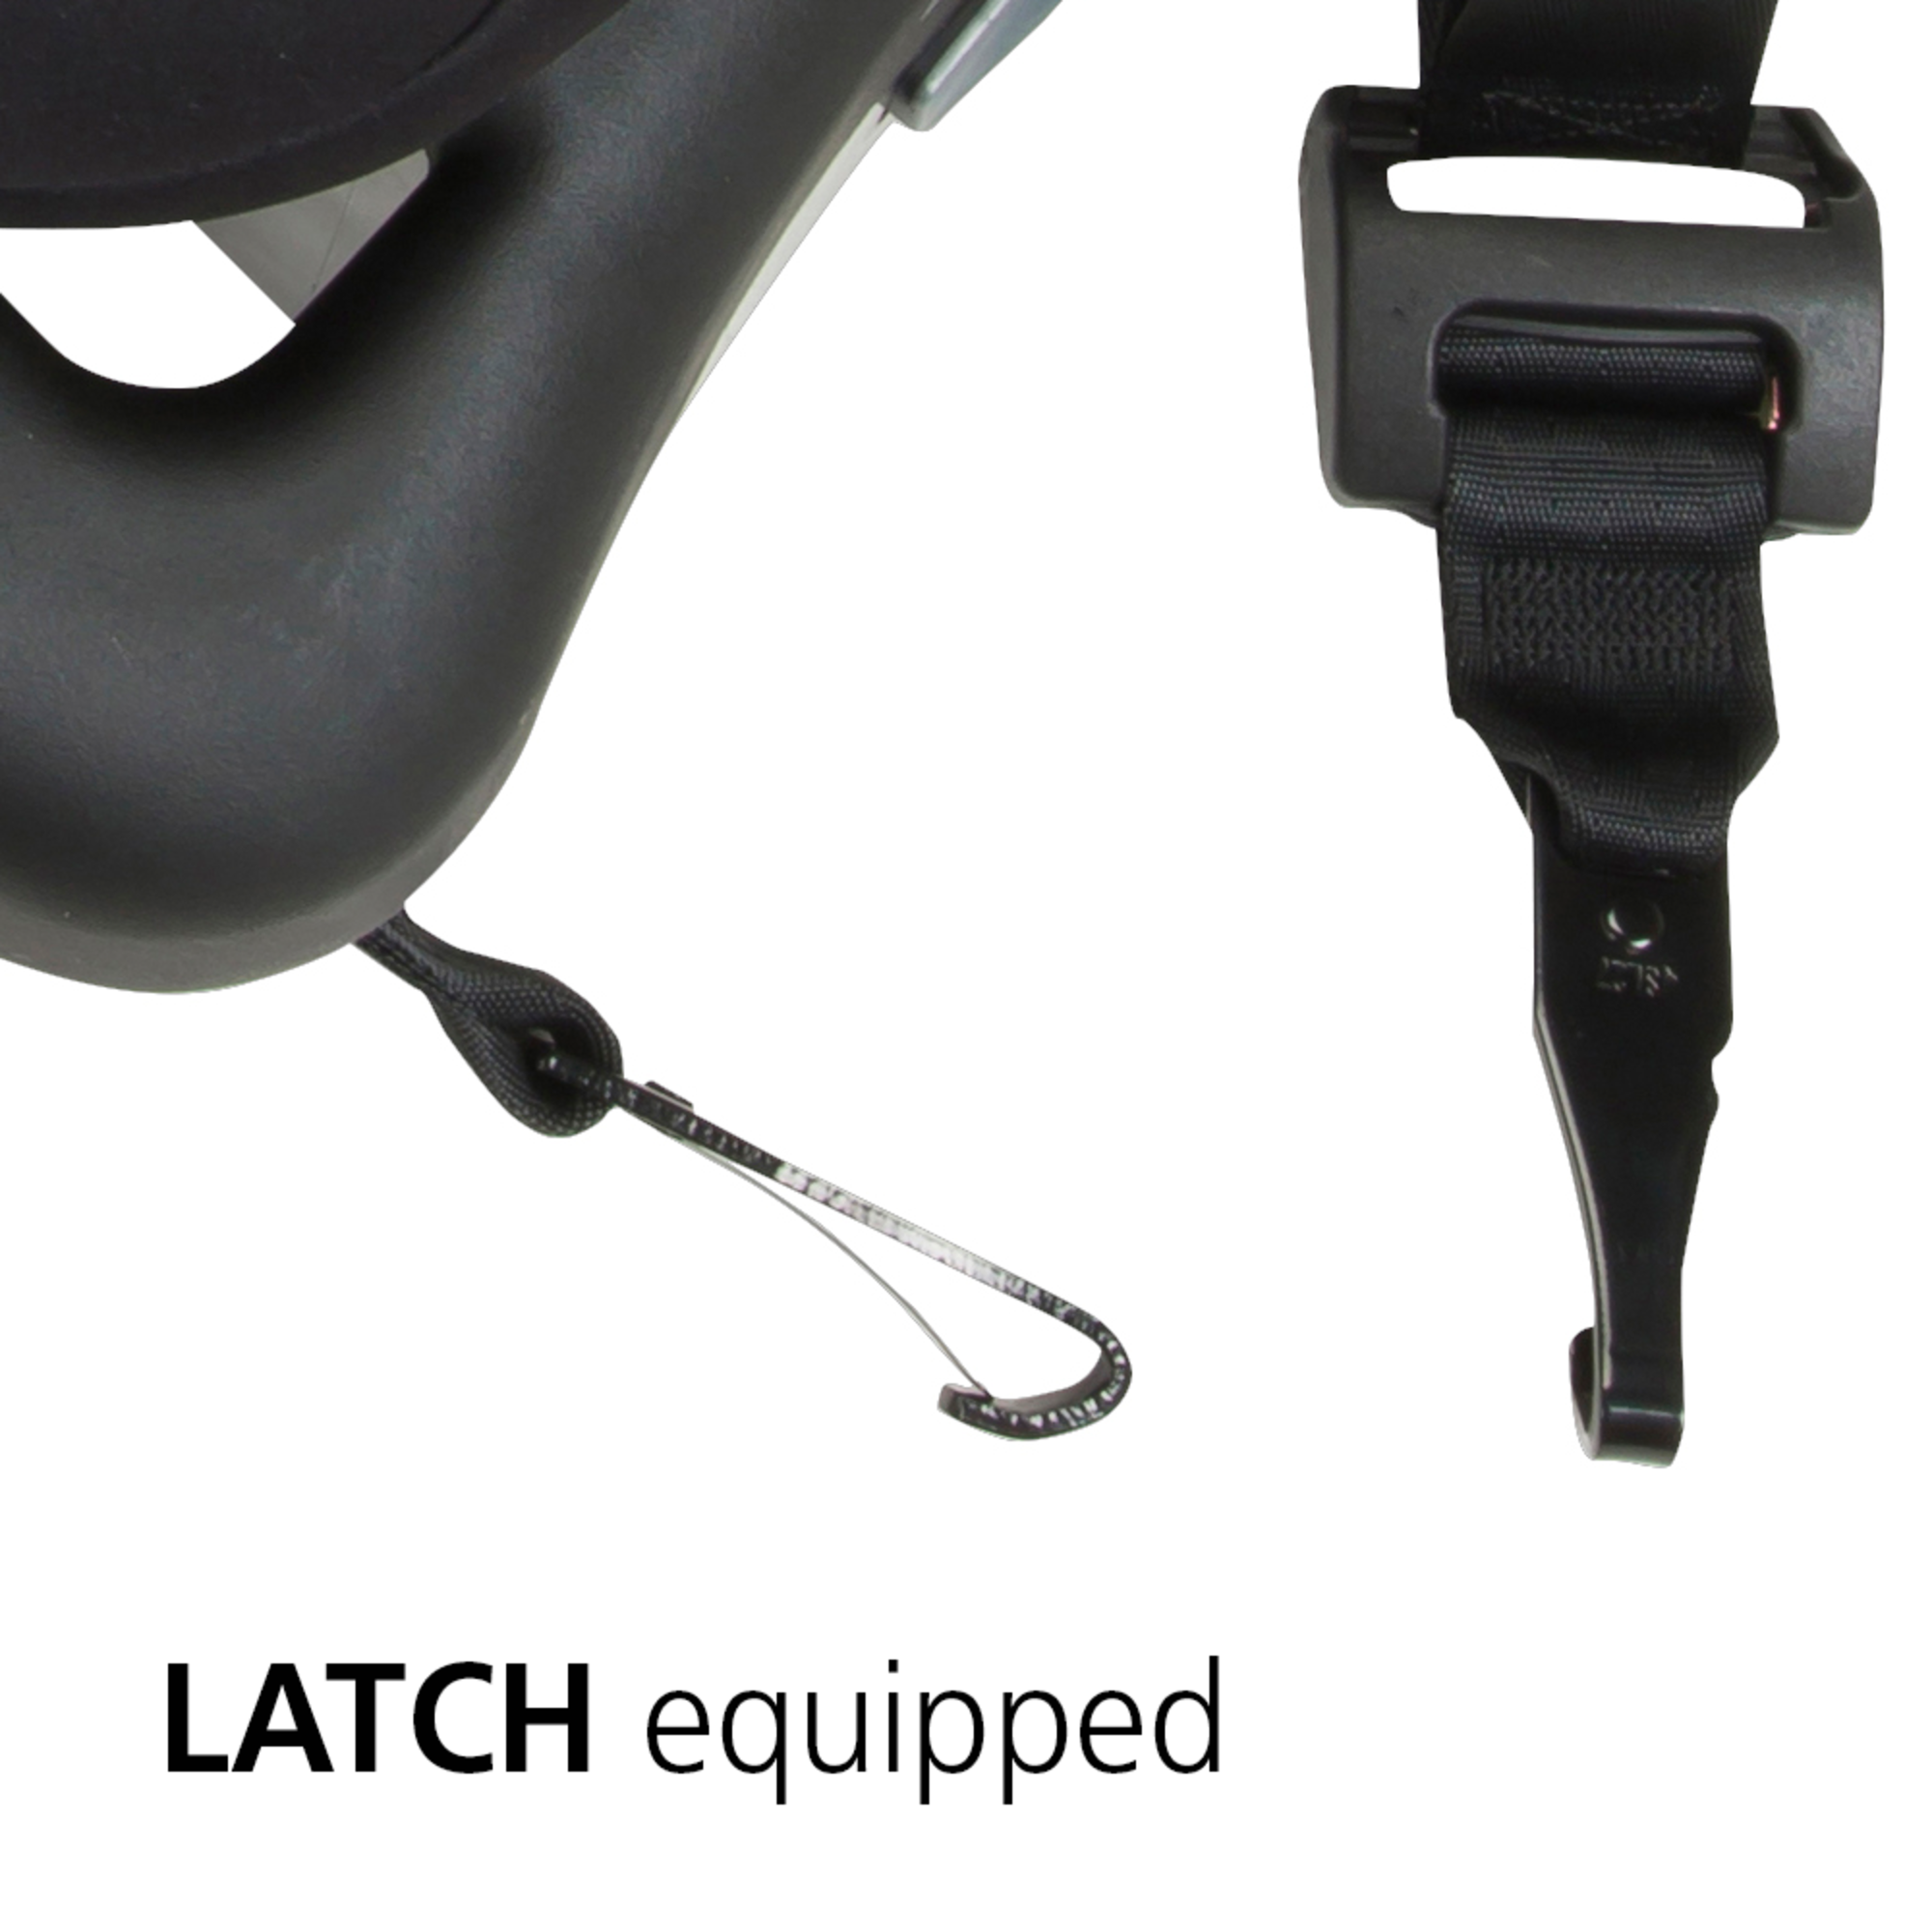 LATCH equipped